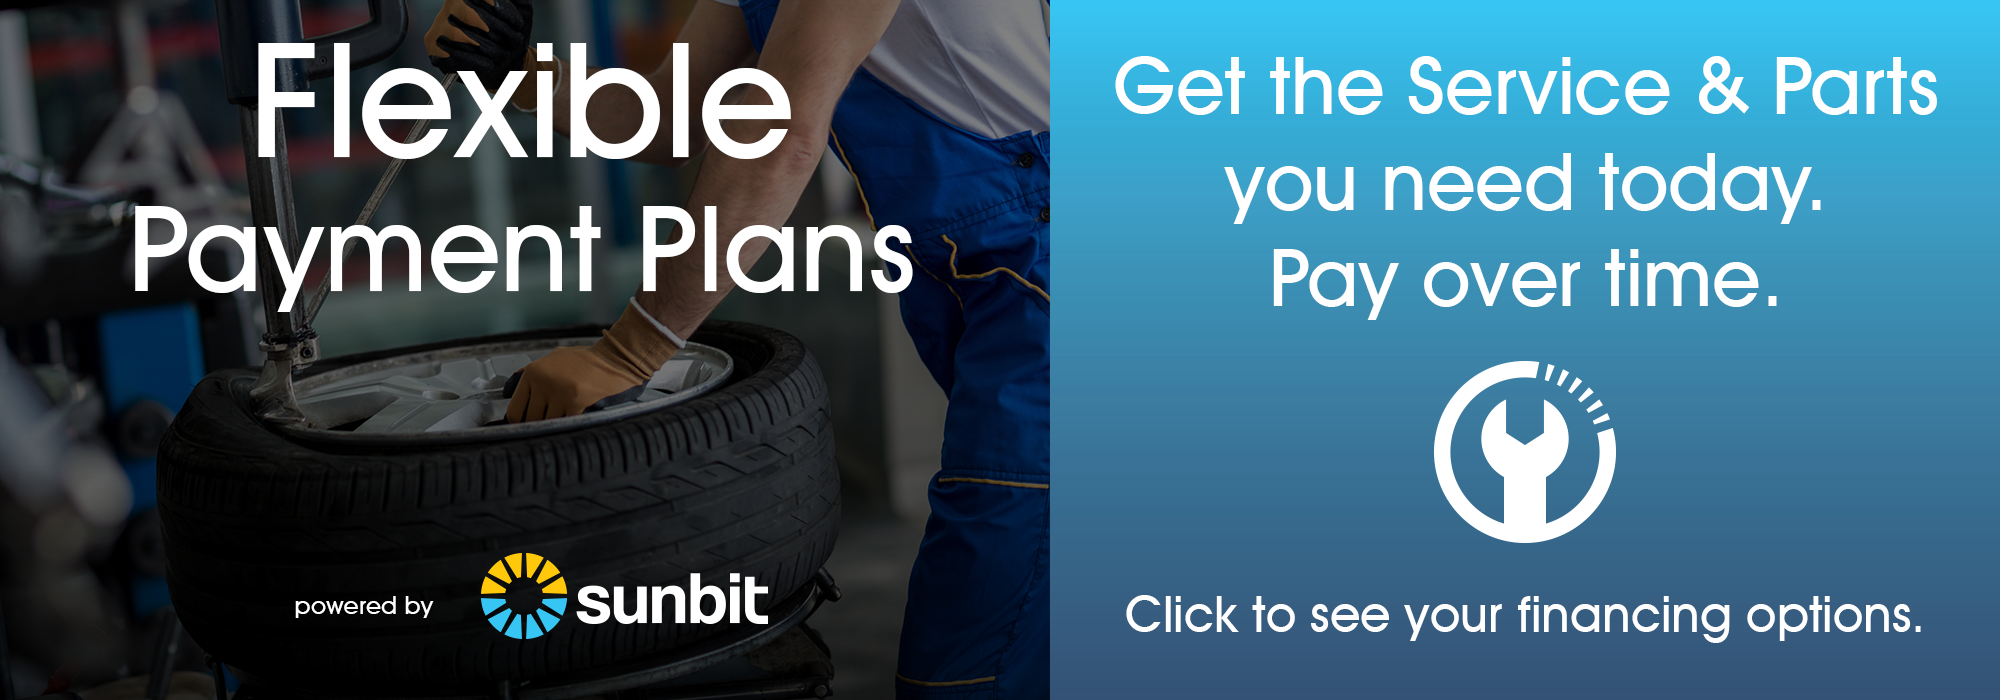 Flexible Payment Plans. Click to see your financing options